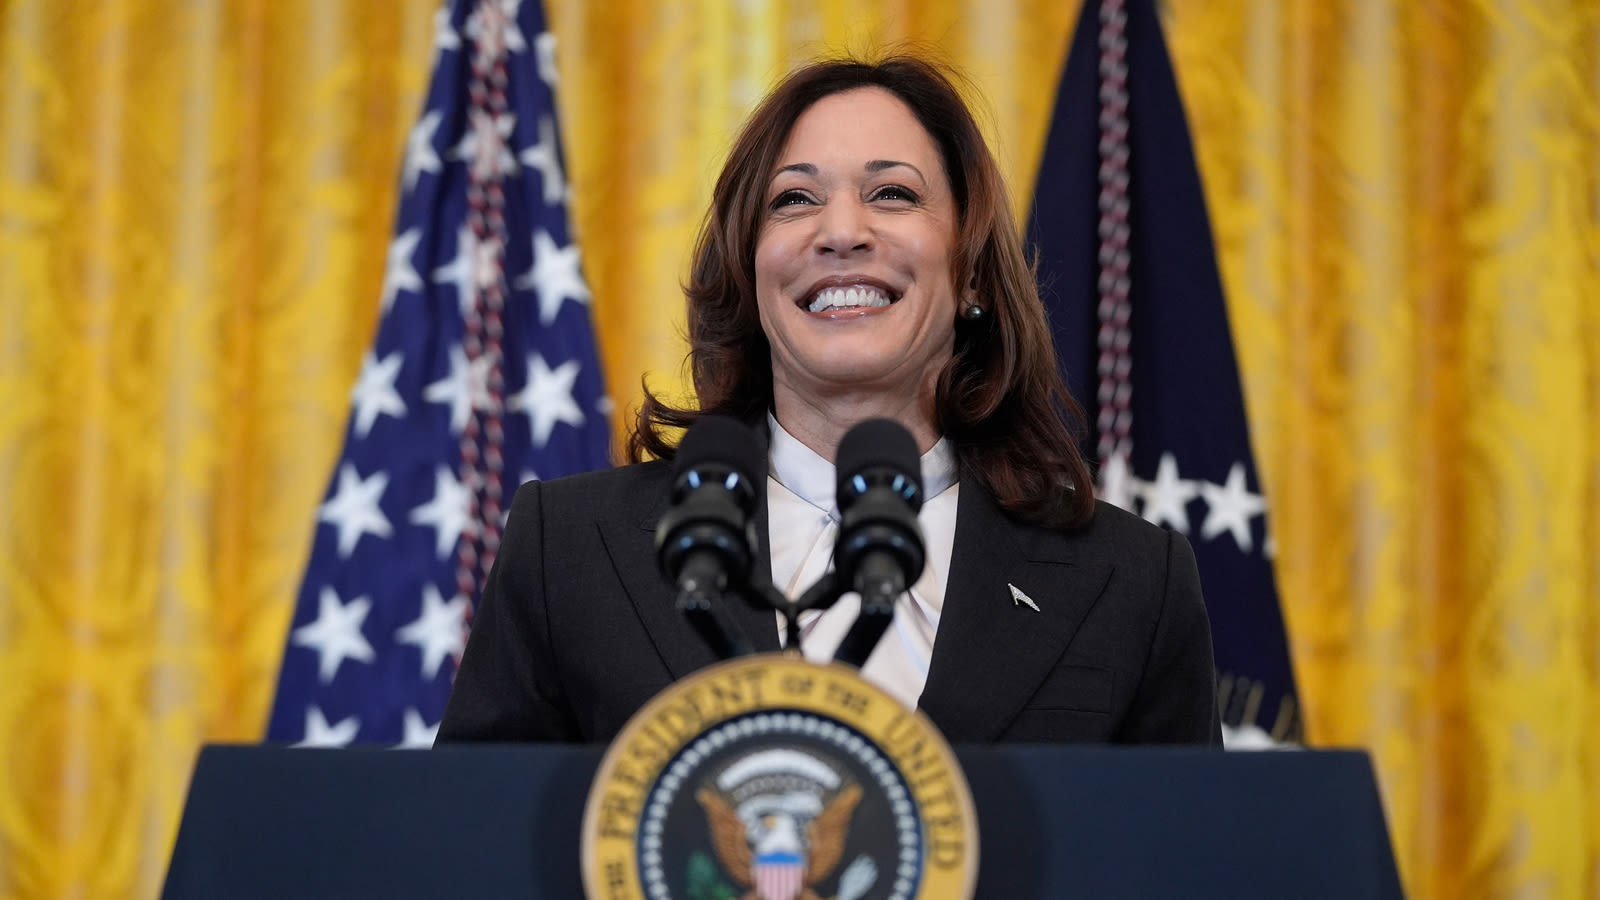 Liberal tech entrepreneurs and Democrats in Silicon Valley invigorated by VP Kamala Harris